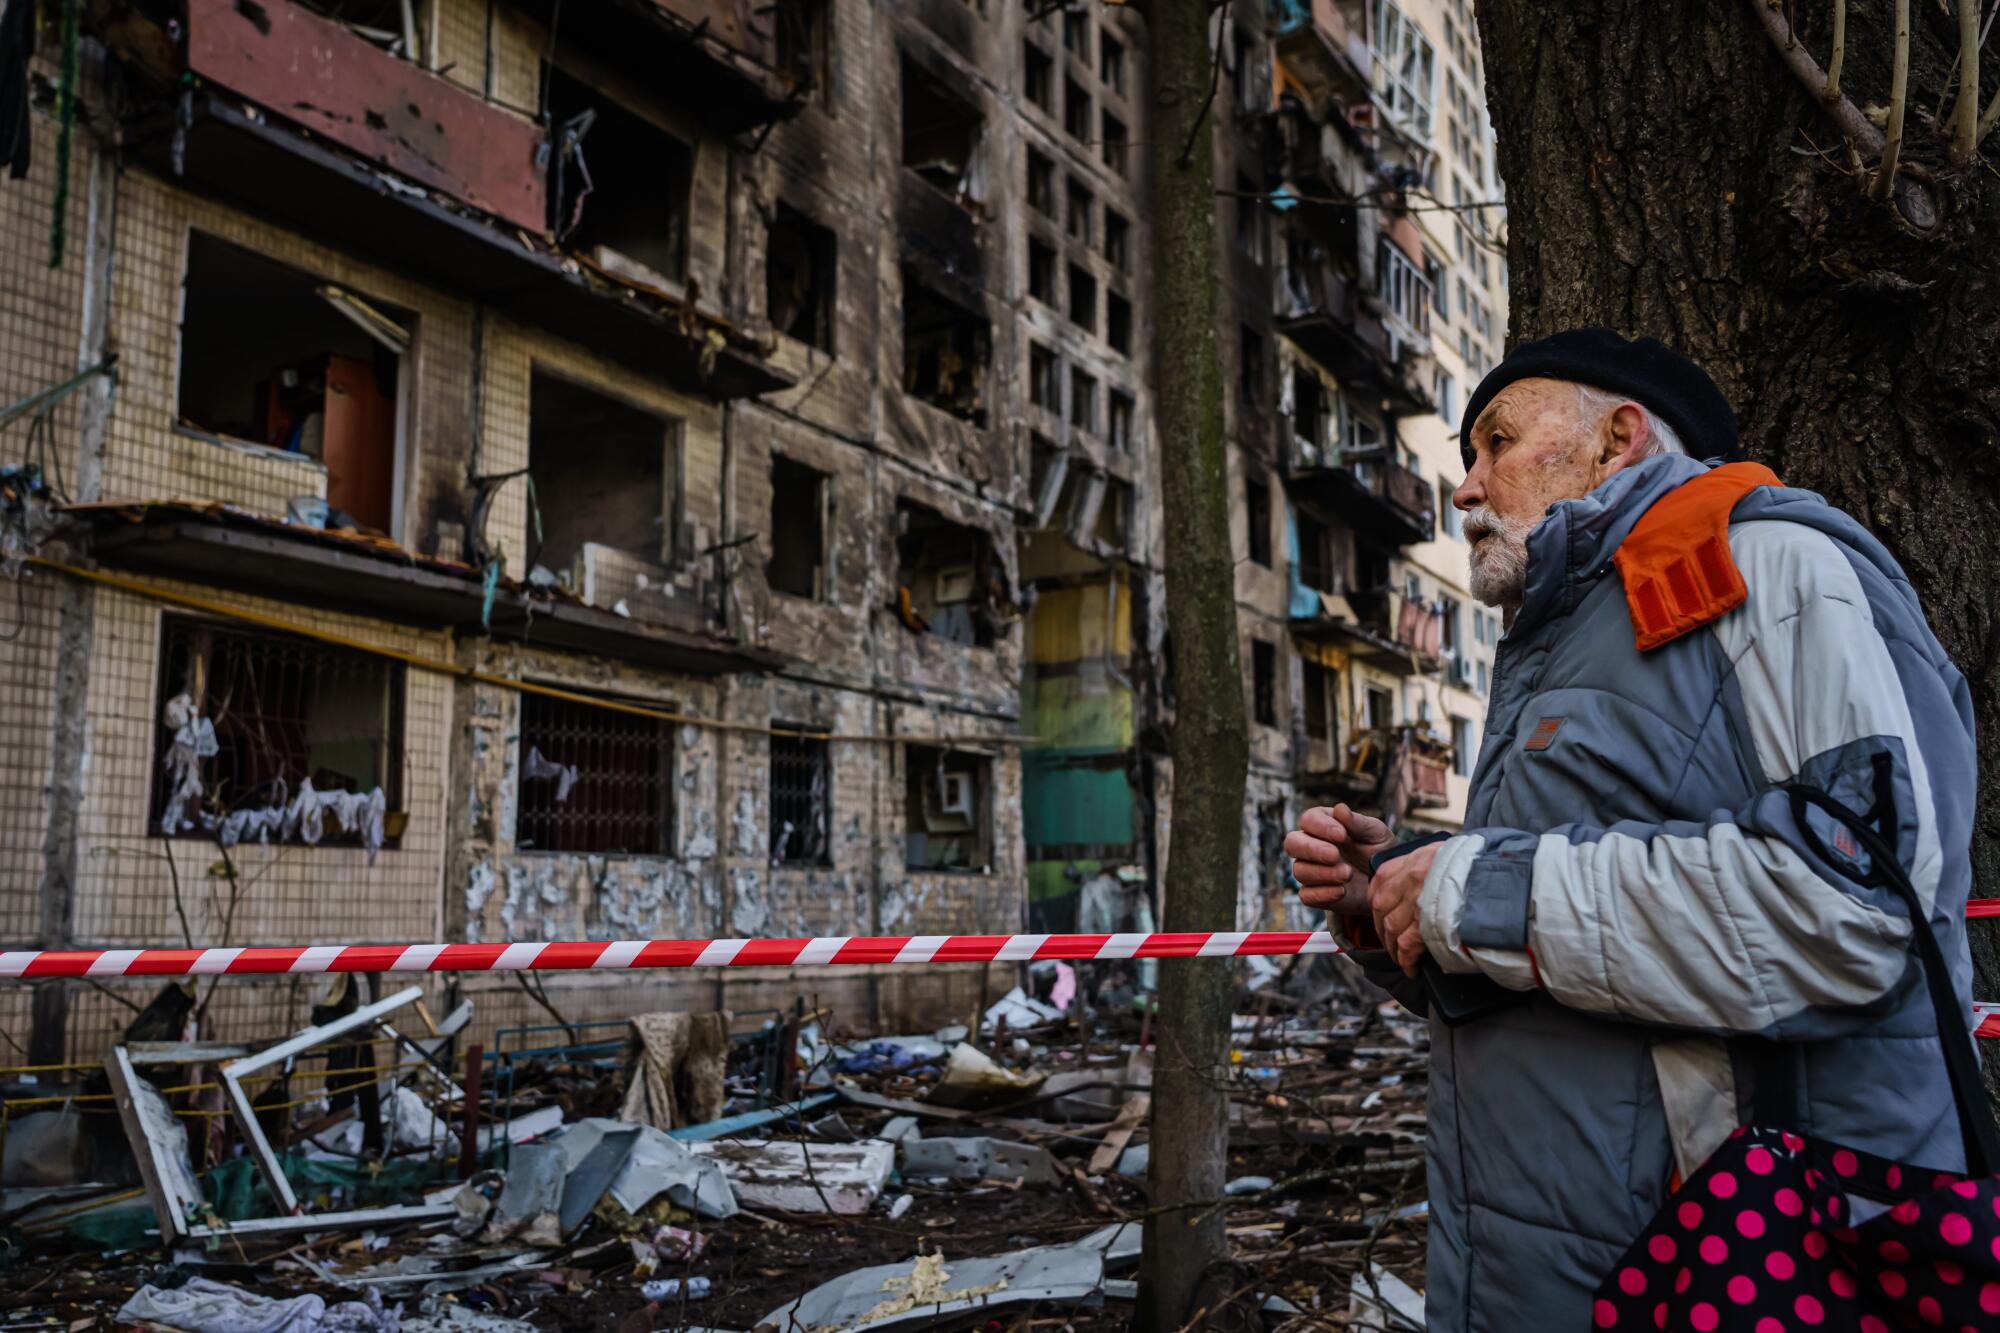 A man looks on at the damaged to apartment building in the Obolon neighborhood of Irpin, Ukraine.